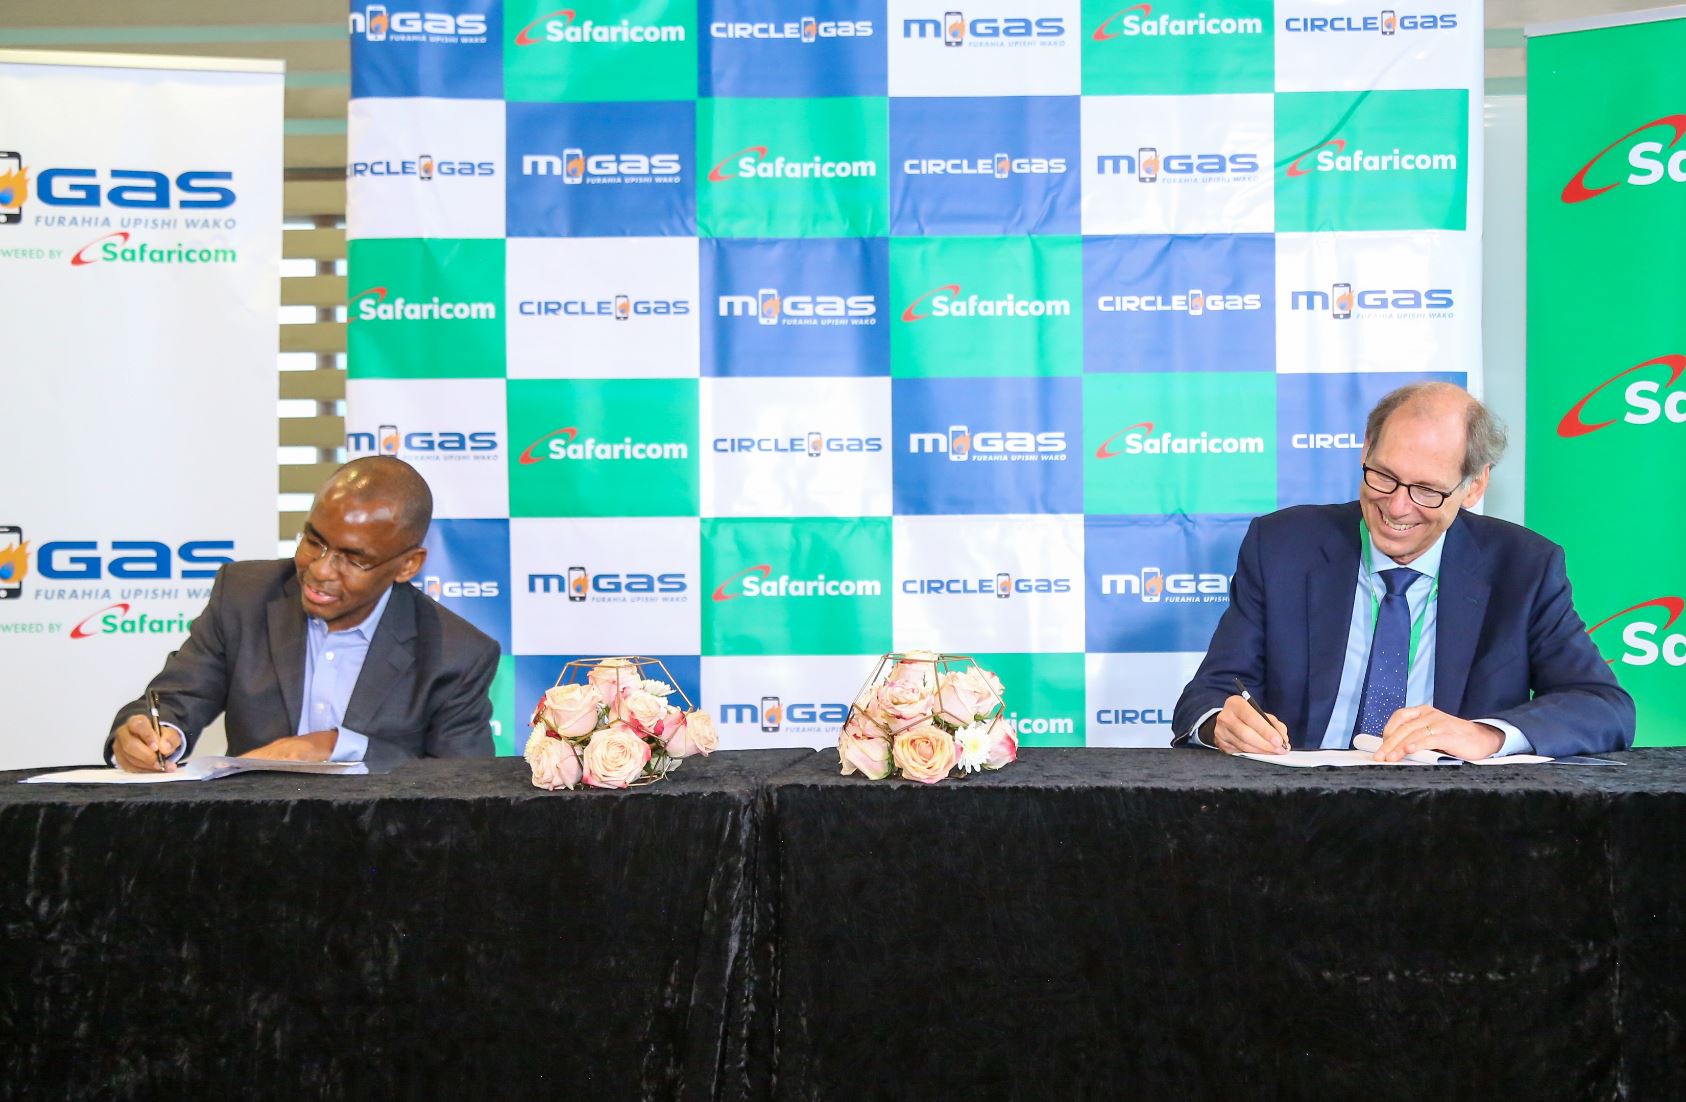 Safaricom and M-Gas Partnership Lives on For Another Day